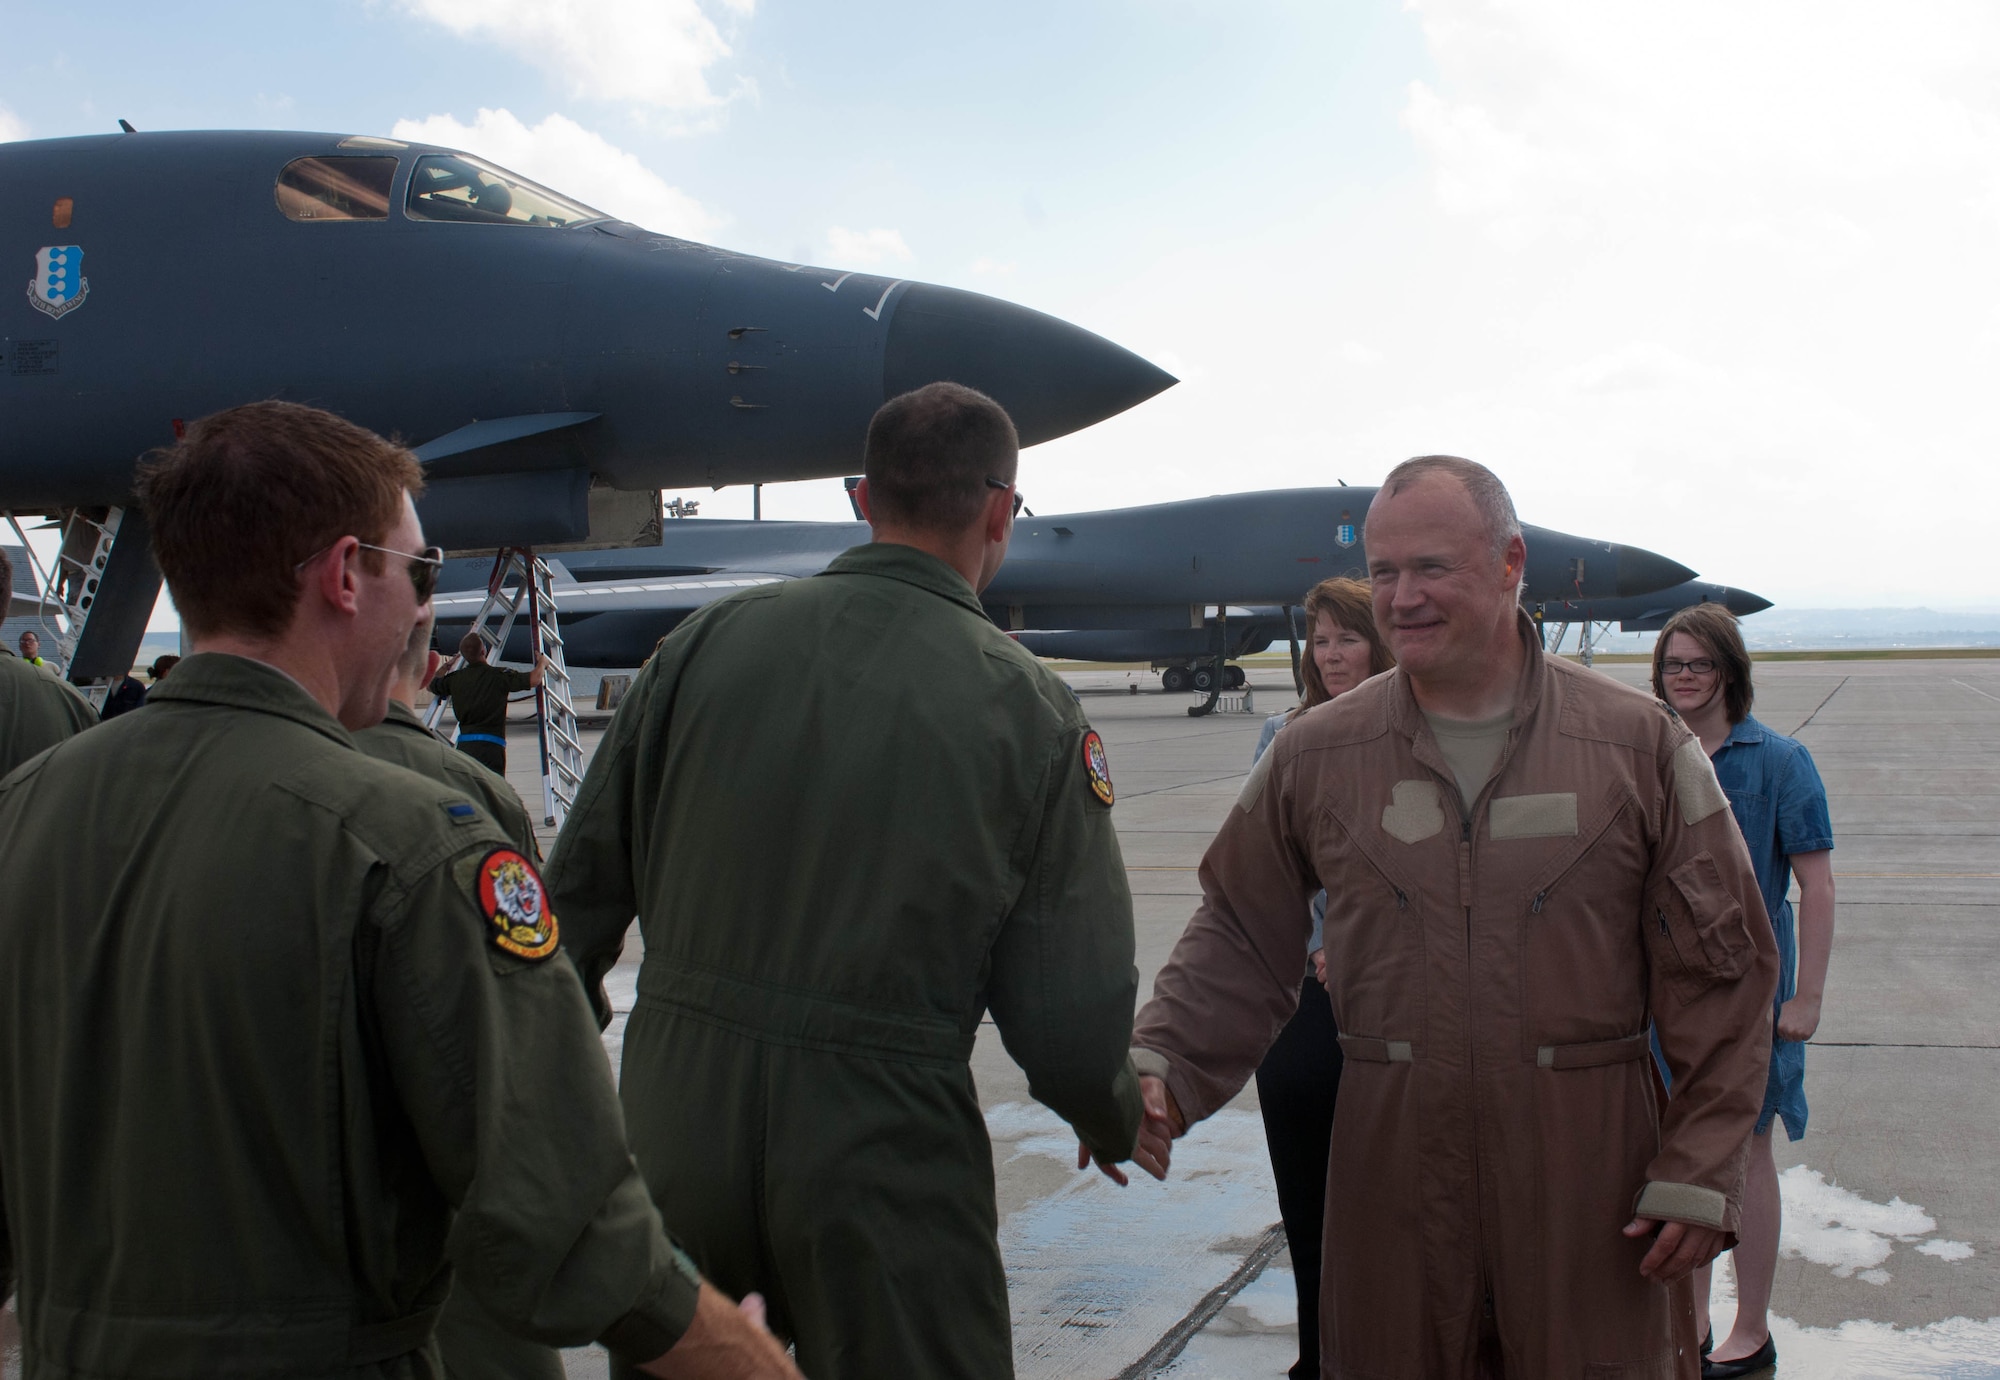 Airmen congratulate Lt. Col. Timothy Schepper, 28th Operations Group senior evaluator, on being the first person to achieve 5,000 hours flying B-1 bombers at Ellsworth Air Force Base, S.D., July 15, 2013. Schepper’s accomplishment is one of the many milestones for the B-1, which includes eight years of consecutive deployment and racking up nearly 10,000 combat missions. (U.S. Air Force photo by Airman 1st Class Zachary Hada/Released)